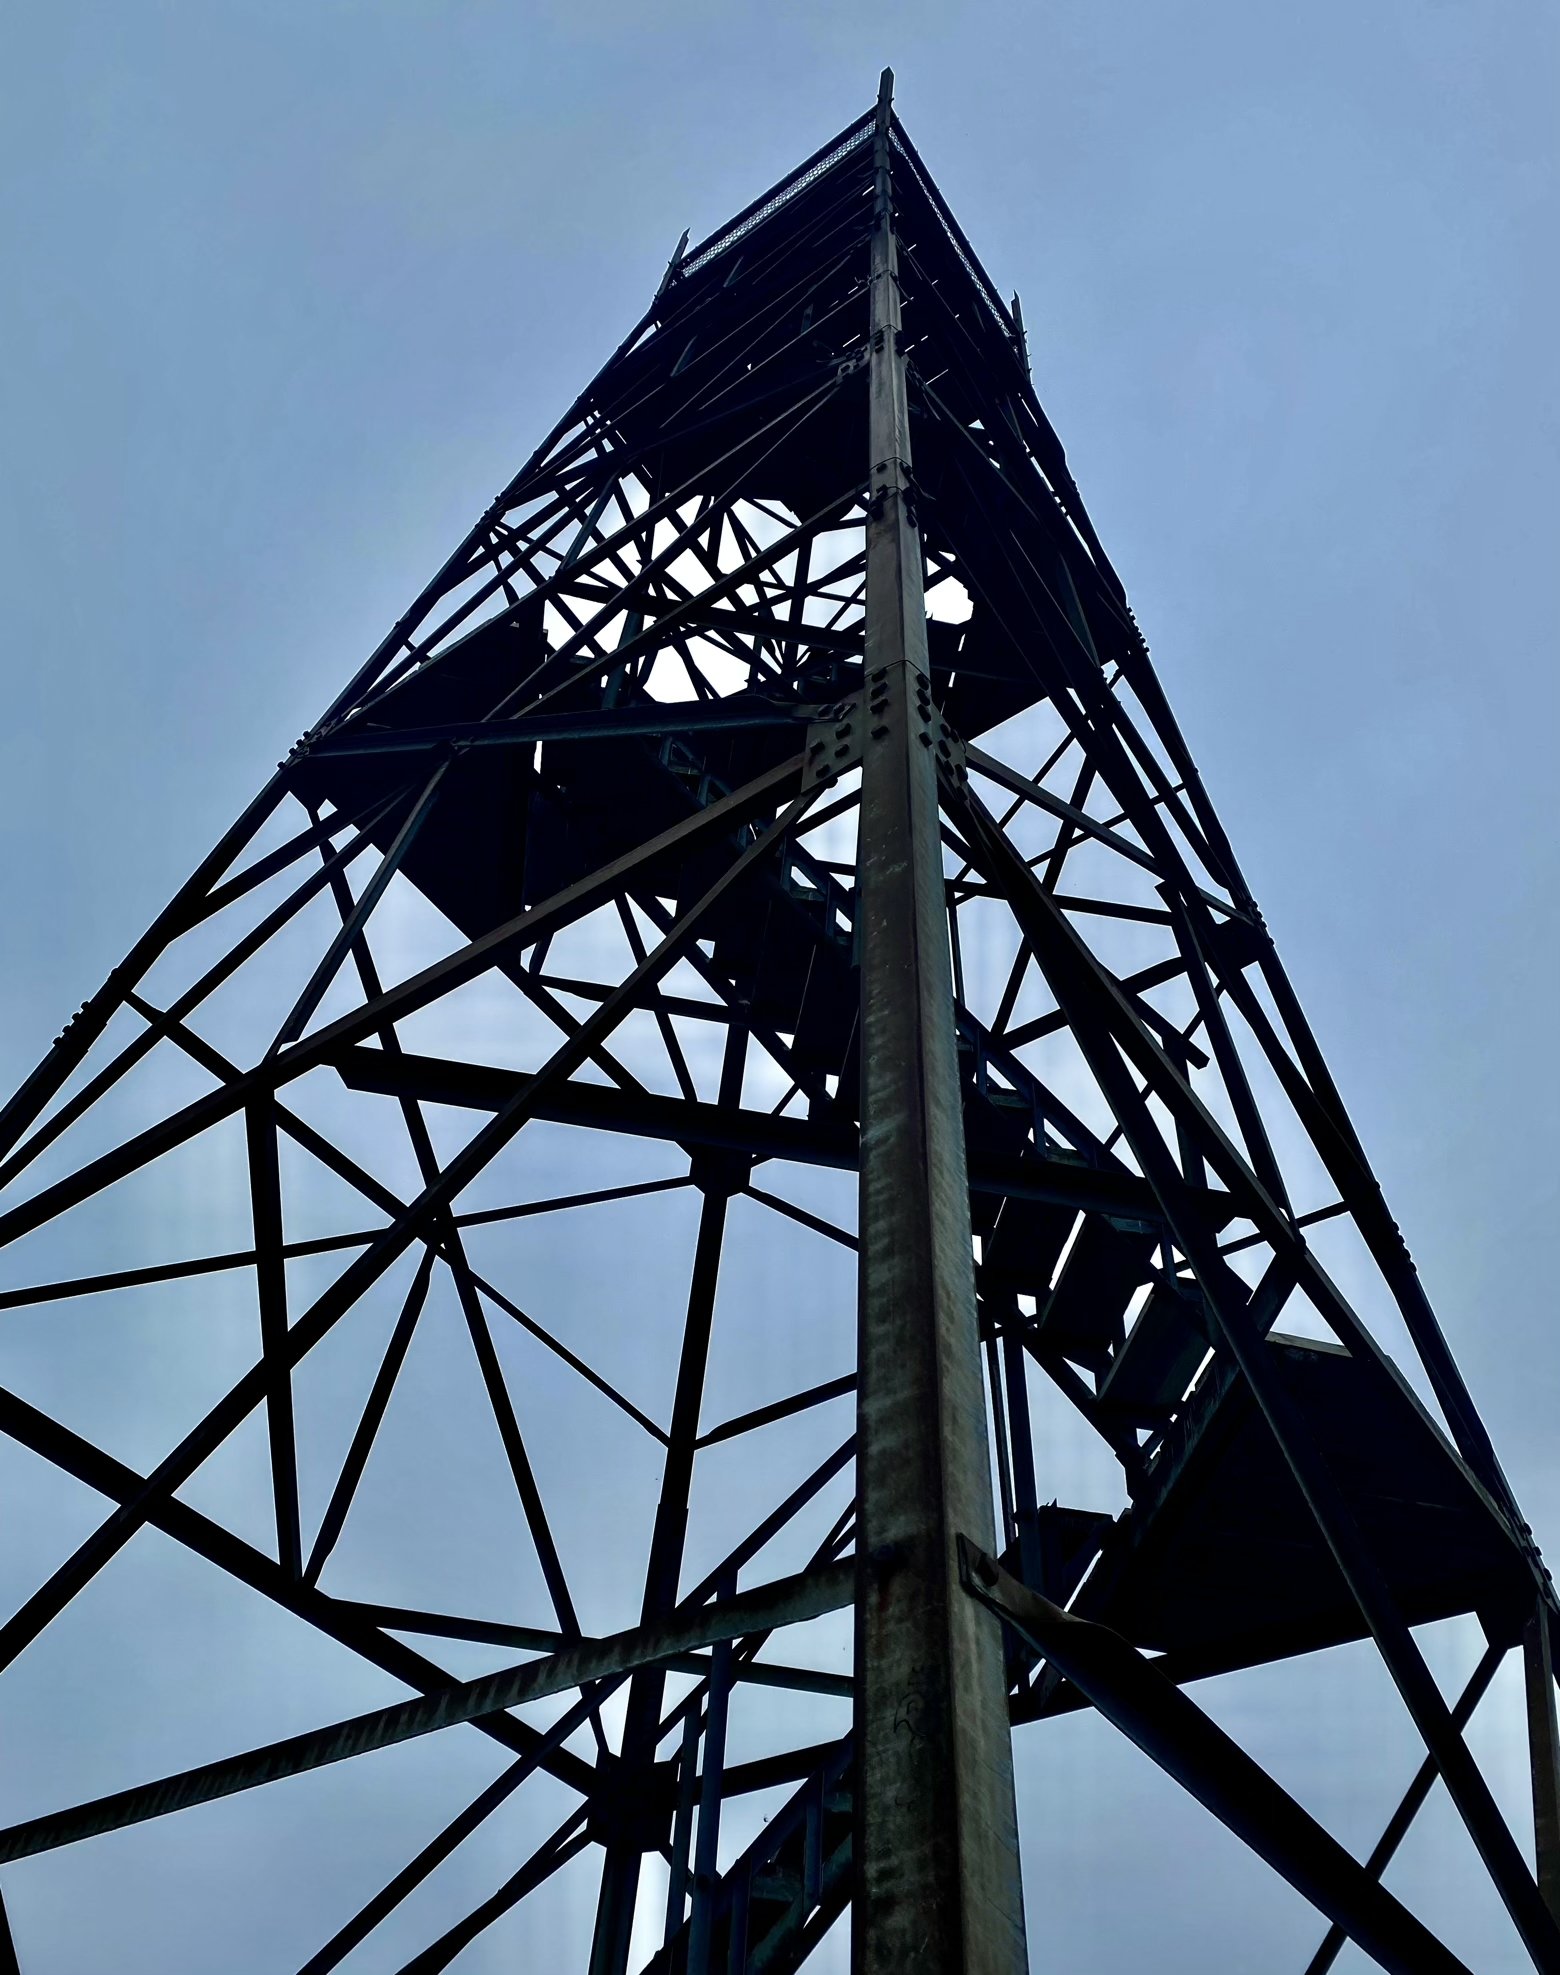 Fire tower on the summit of Mt. Belvidere